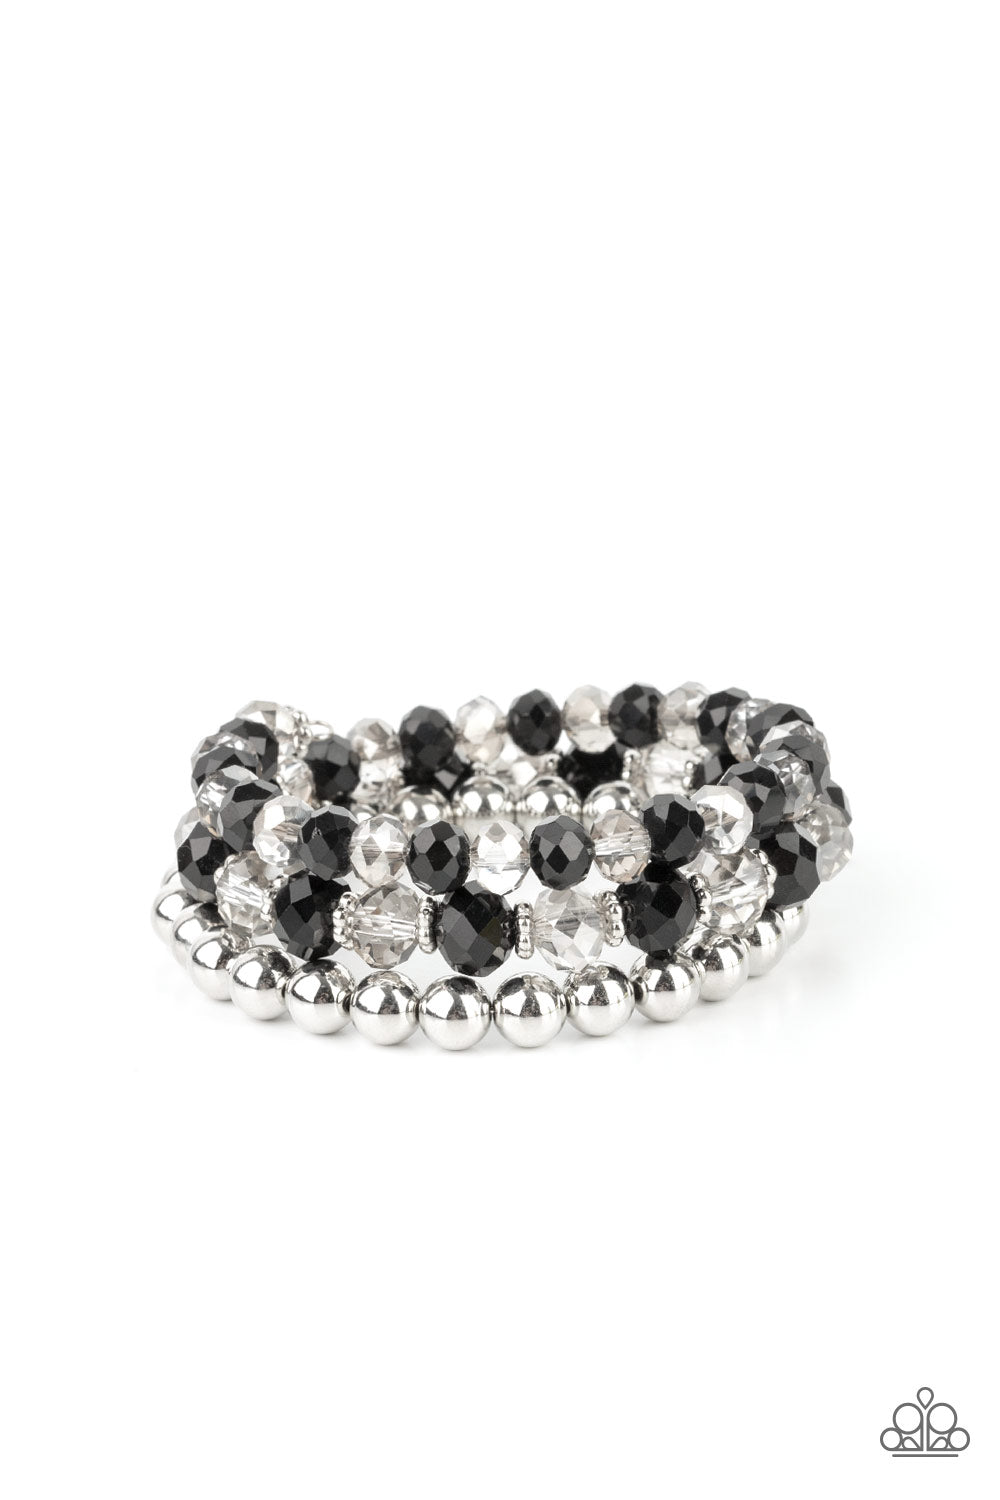 Paparazzi Accessories Gimme Gimme - Black Infinity Bracelets sections of shiny silver beads and an alternating pattern of smoky and glittery black rhinestone gems gradually increase in size along a coiled wire, creating a jaw-dropping infinity wrap bracelet around the wrist.